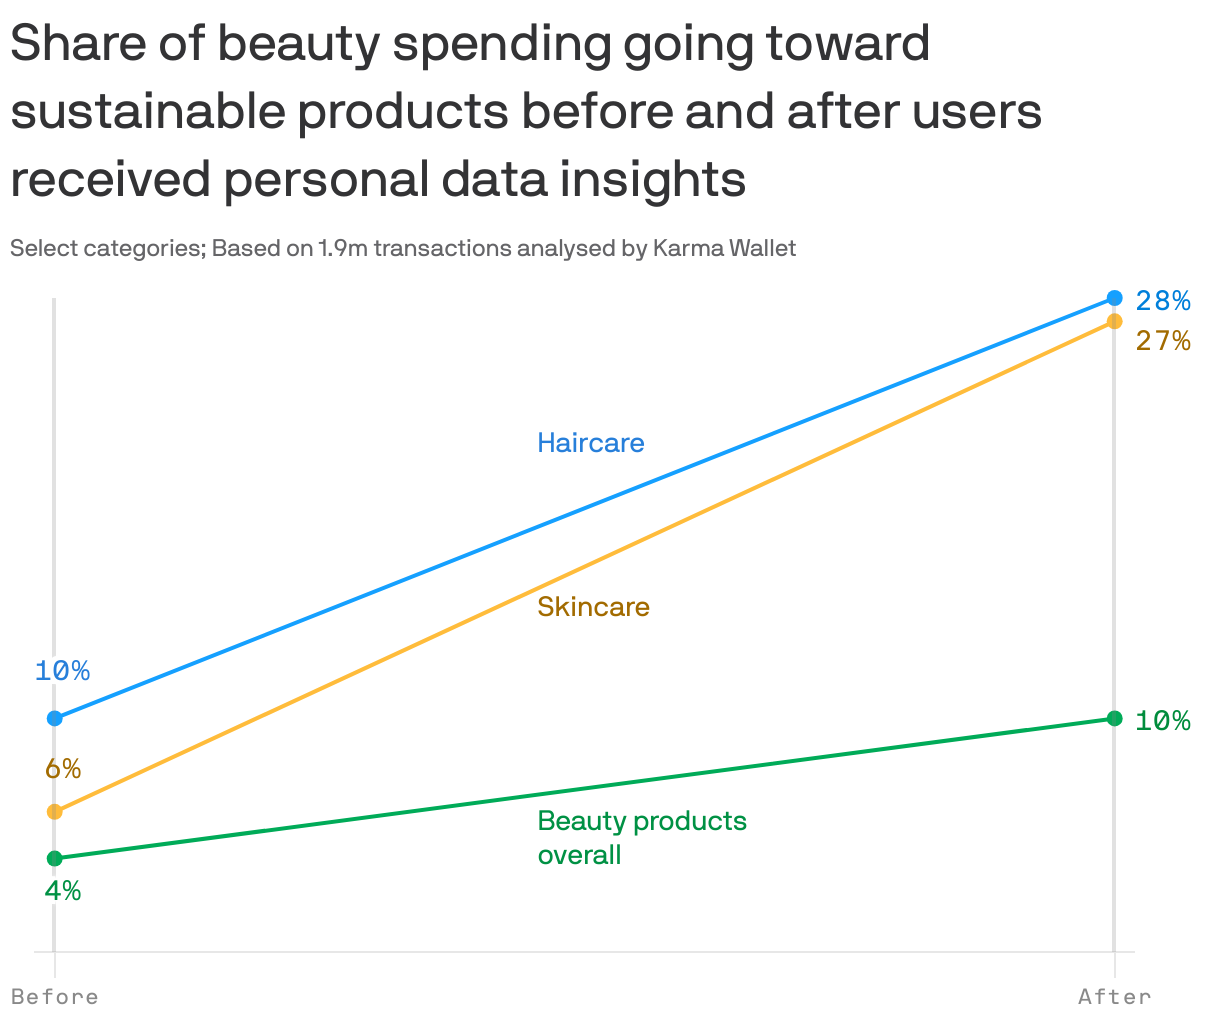 Share of beauty spending going toward sustainable products before and after users received personal data insights